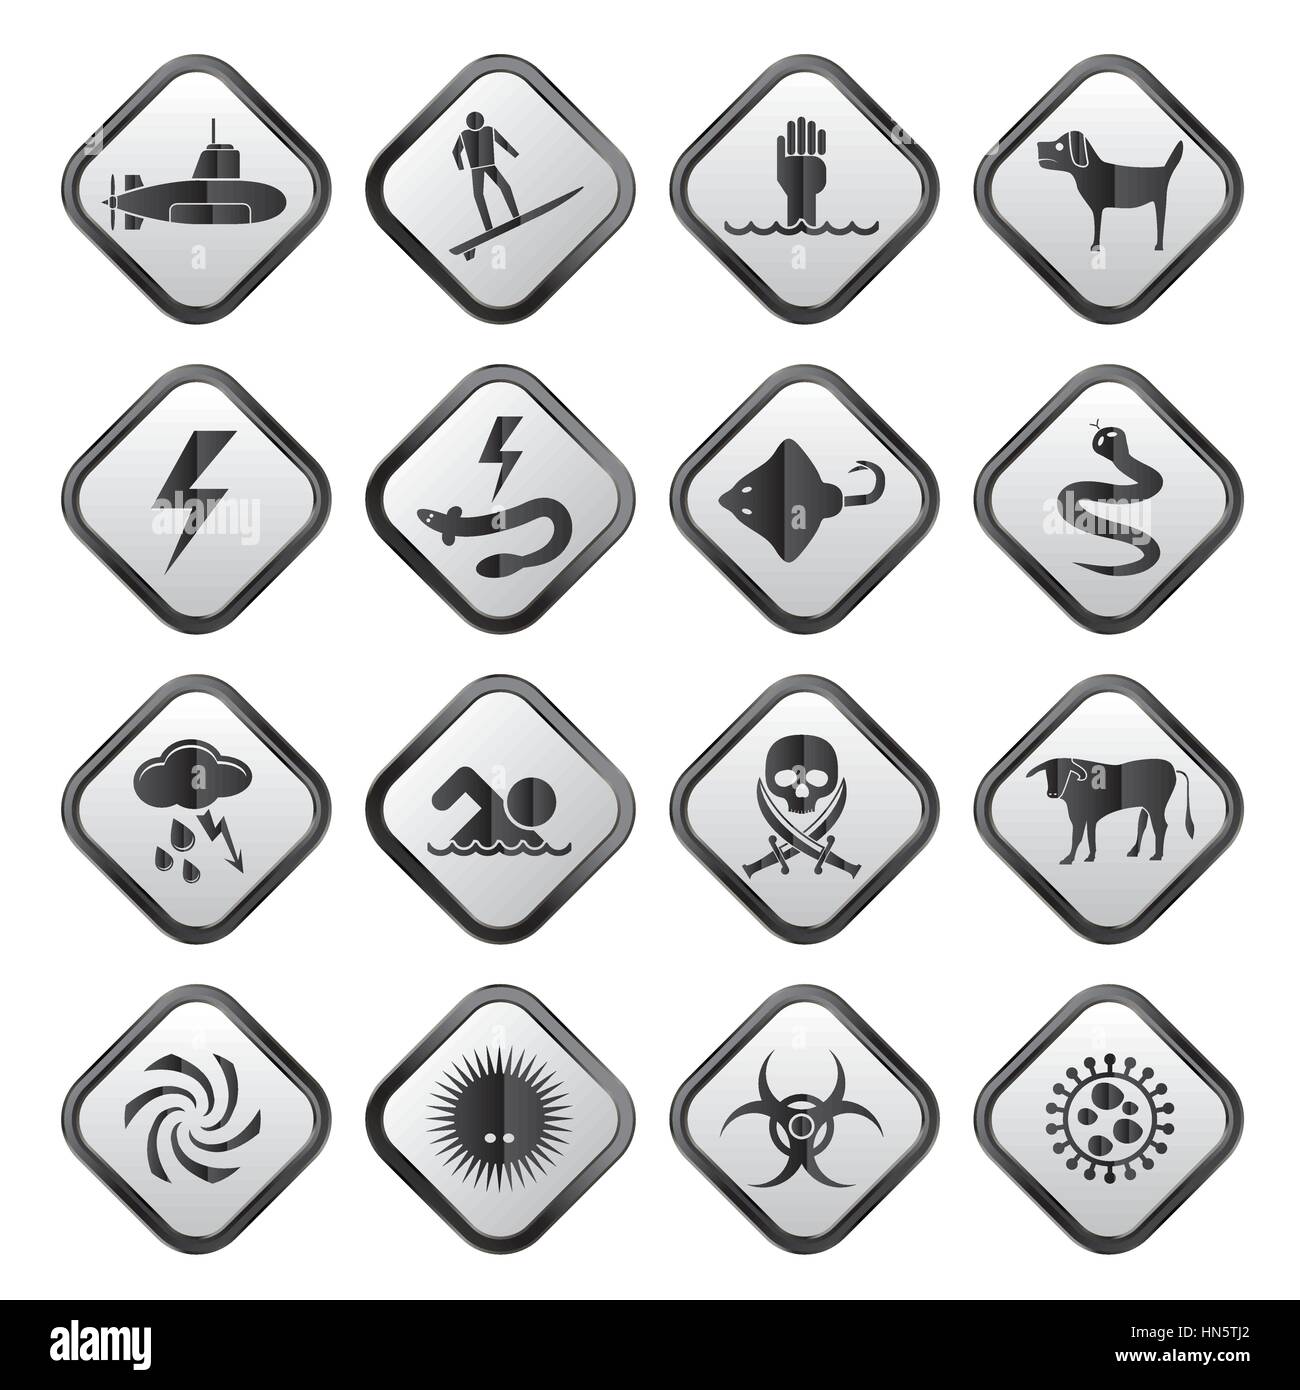 Warning Signs for dangers in sea, ocean, beach and rivers - vector icon set 2 Stock Vector